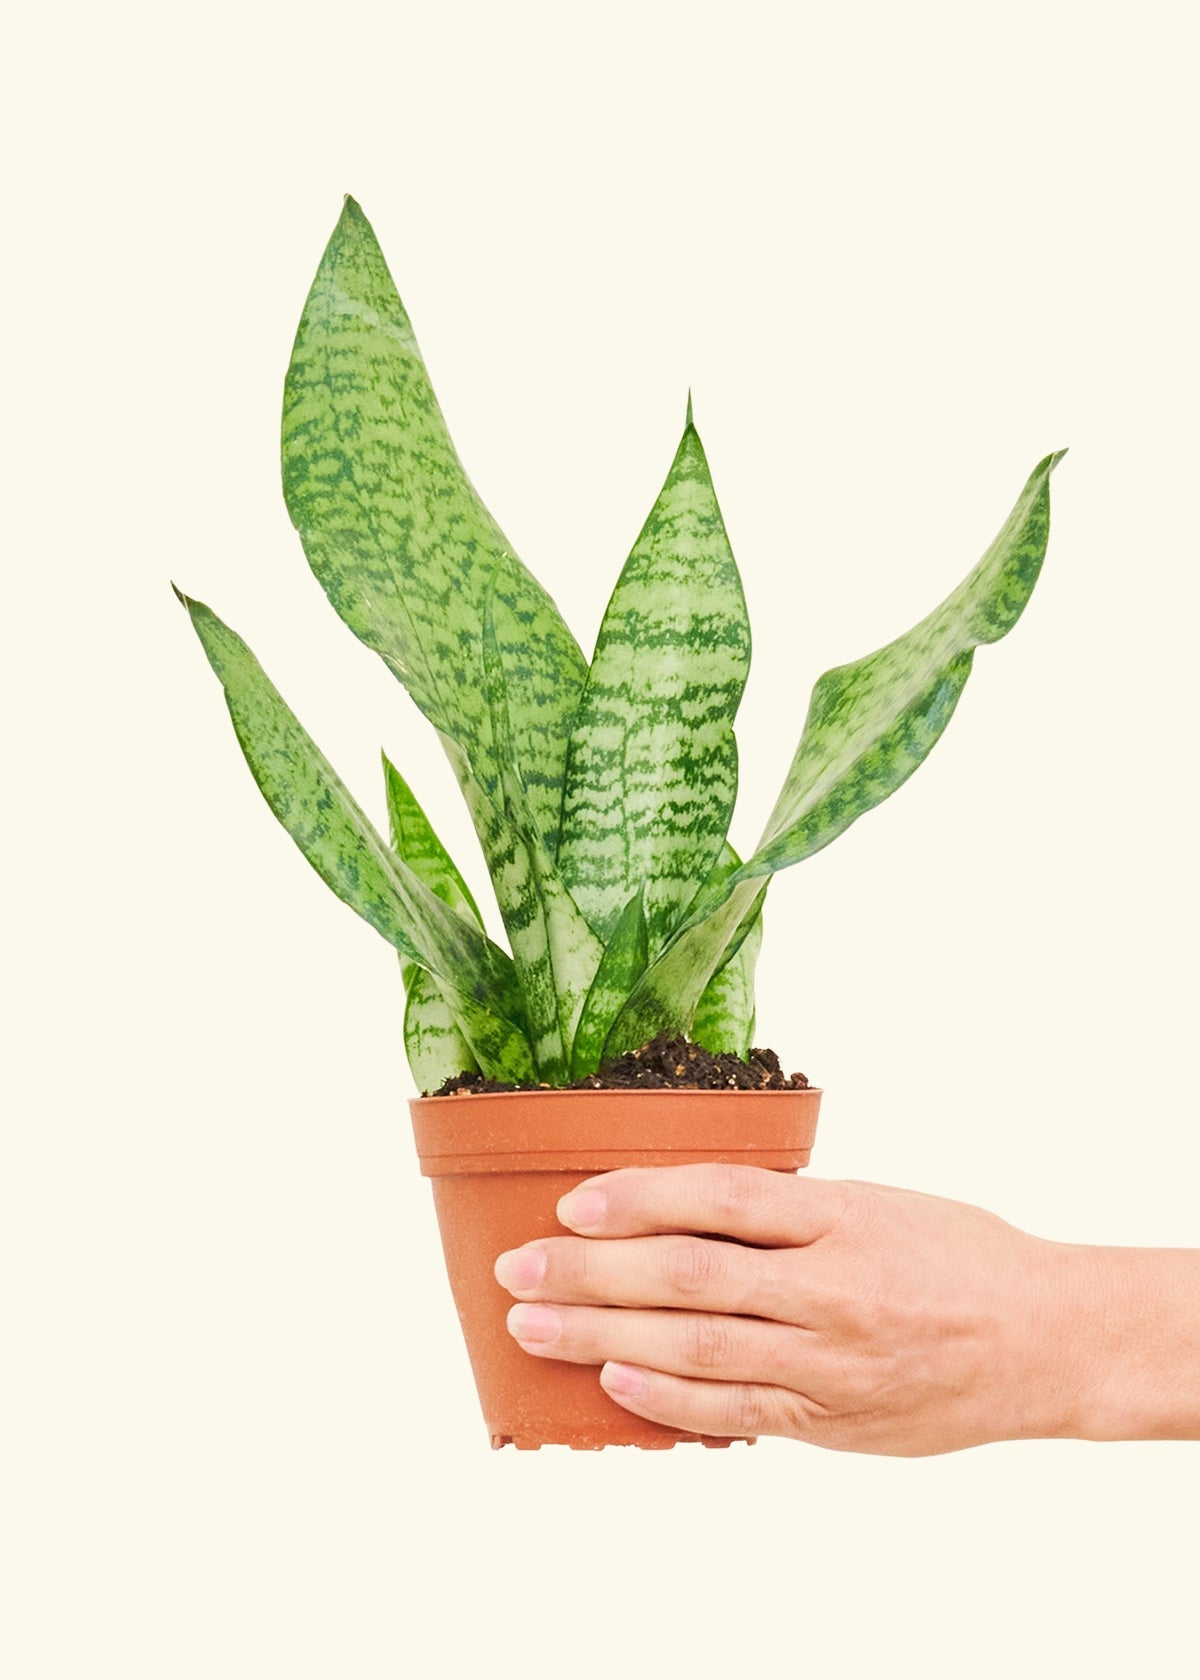 Small Snake Plant (Sansevieria zeylanica) in a grow pot.